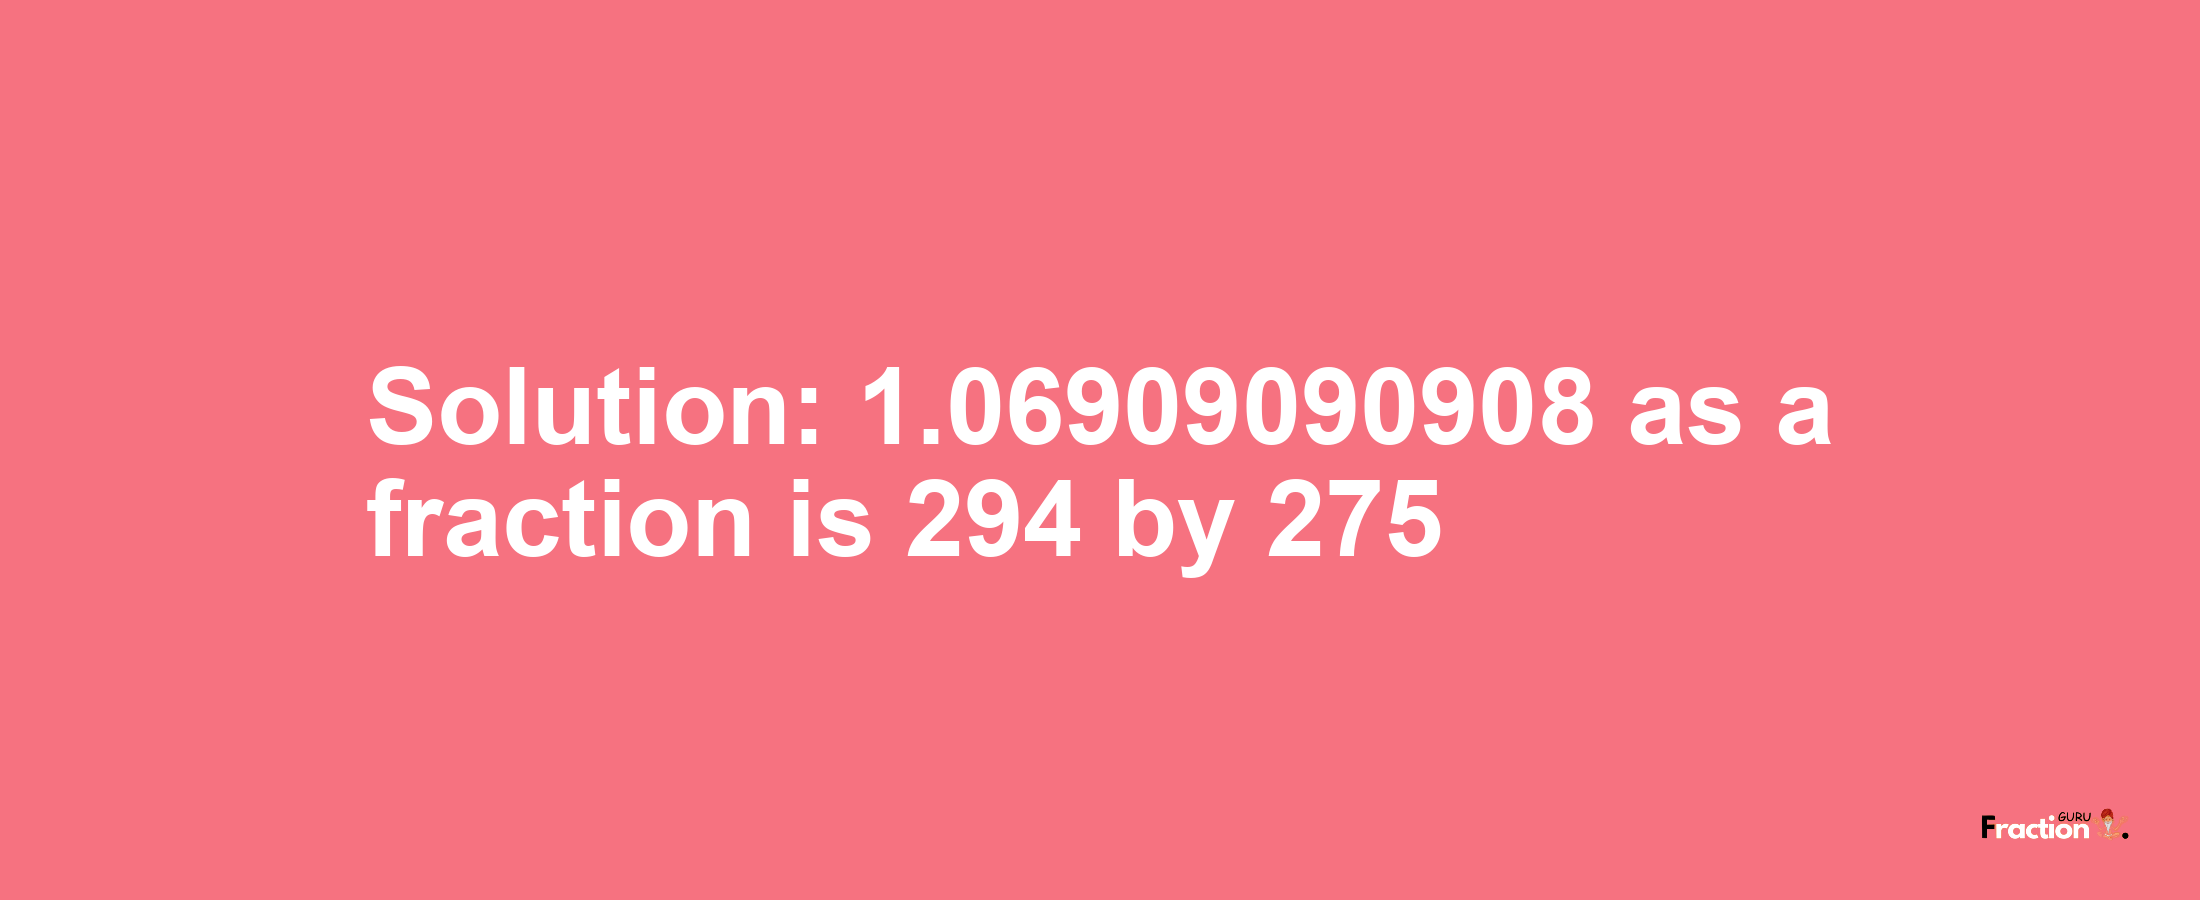 Solution:1.06909090908 as a fraction is 294/275